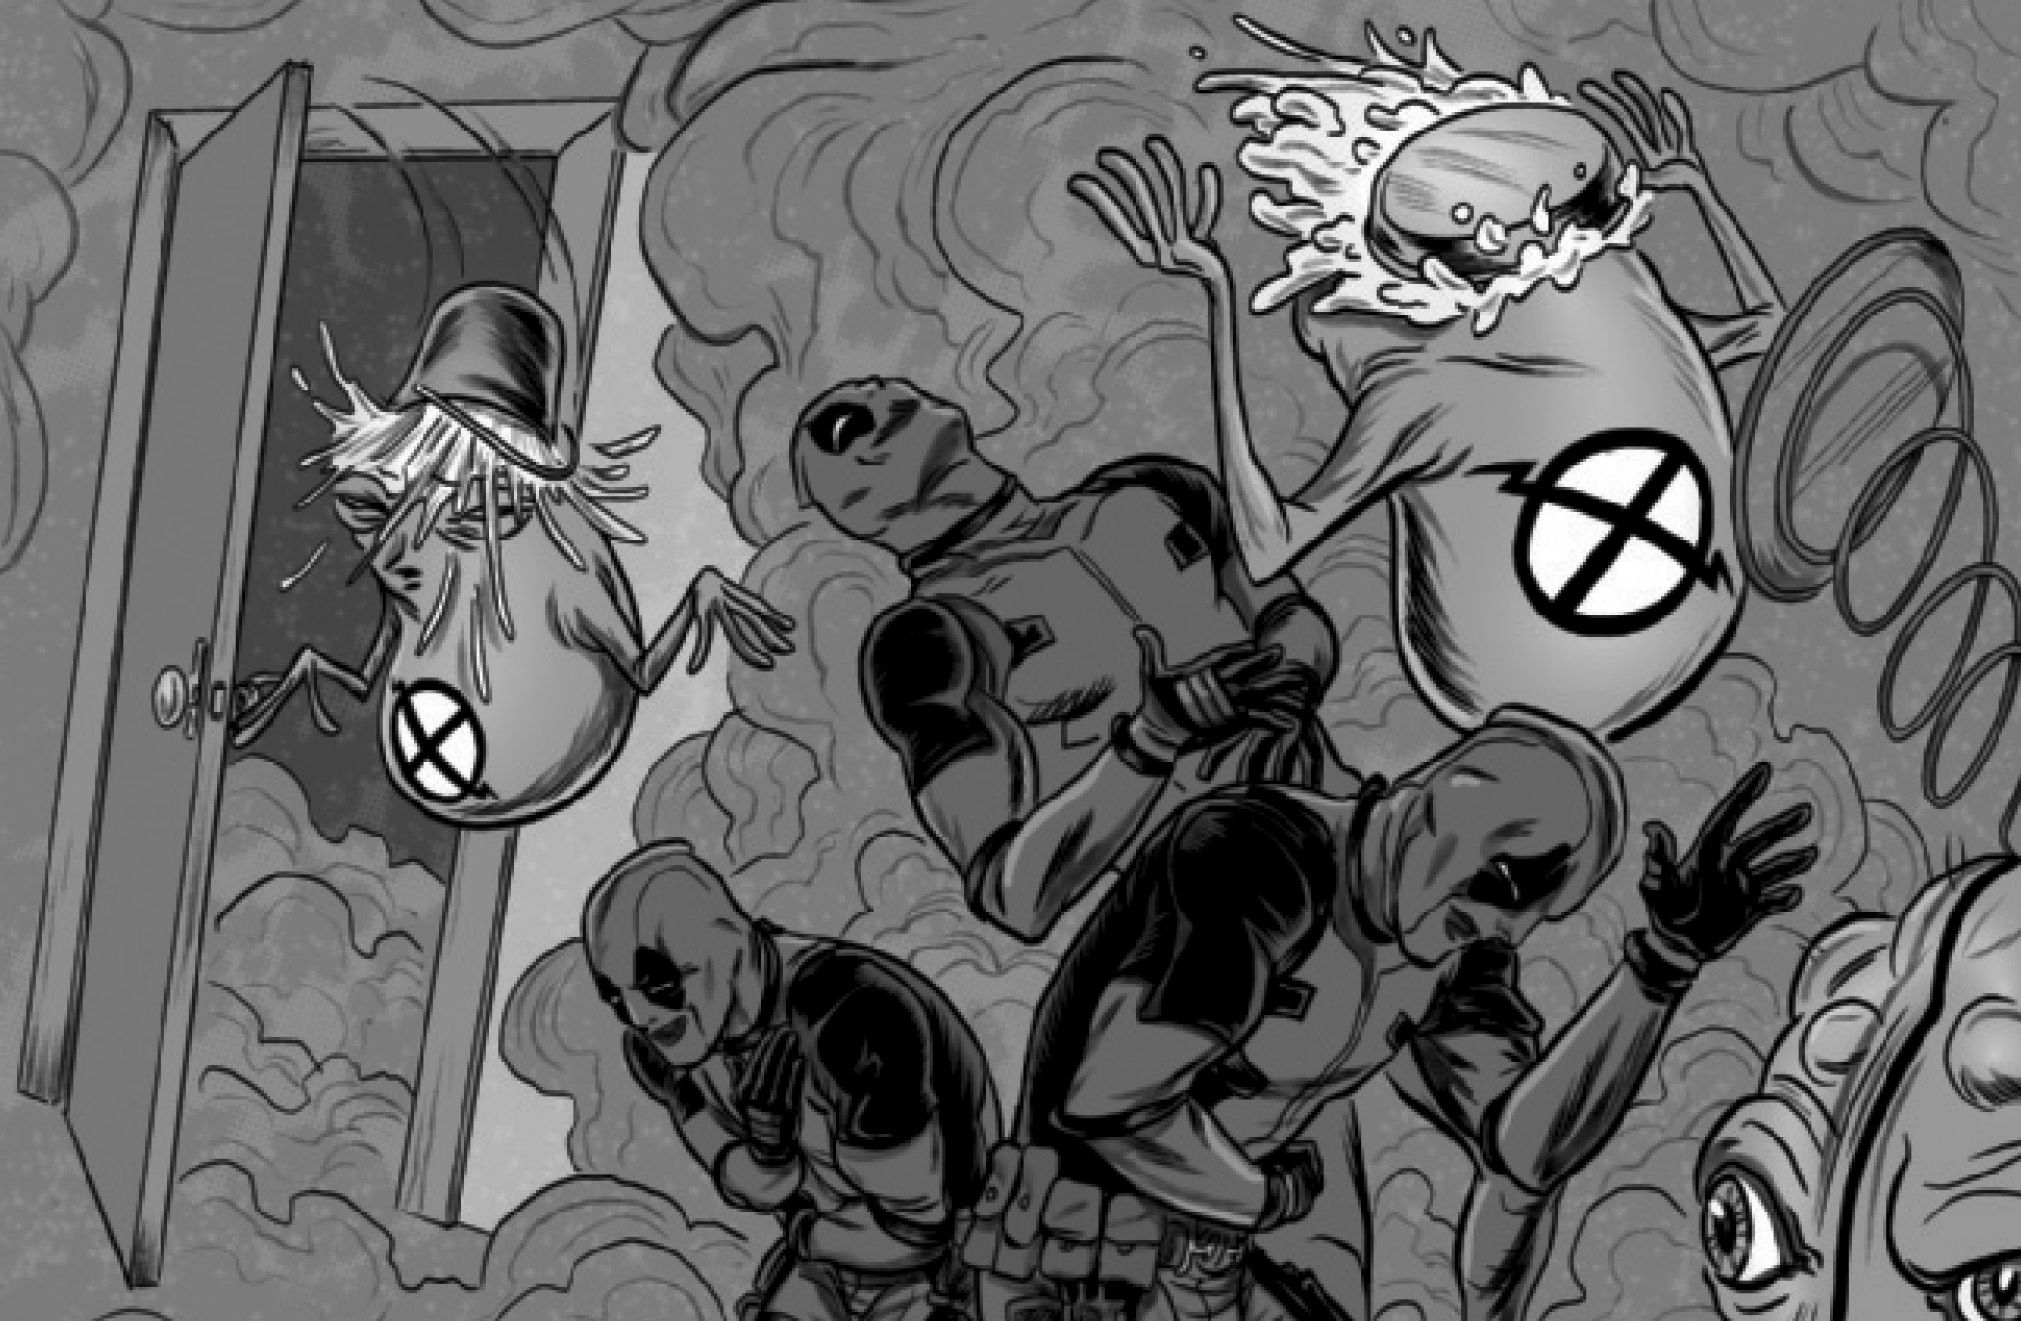 deadpool dunks water on doop's head and throws pie in his face